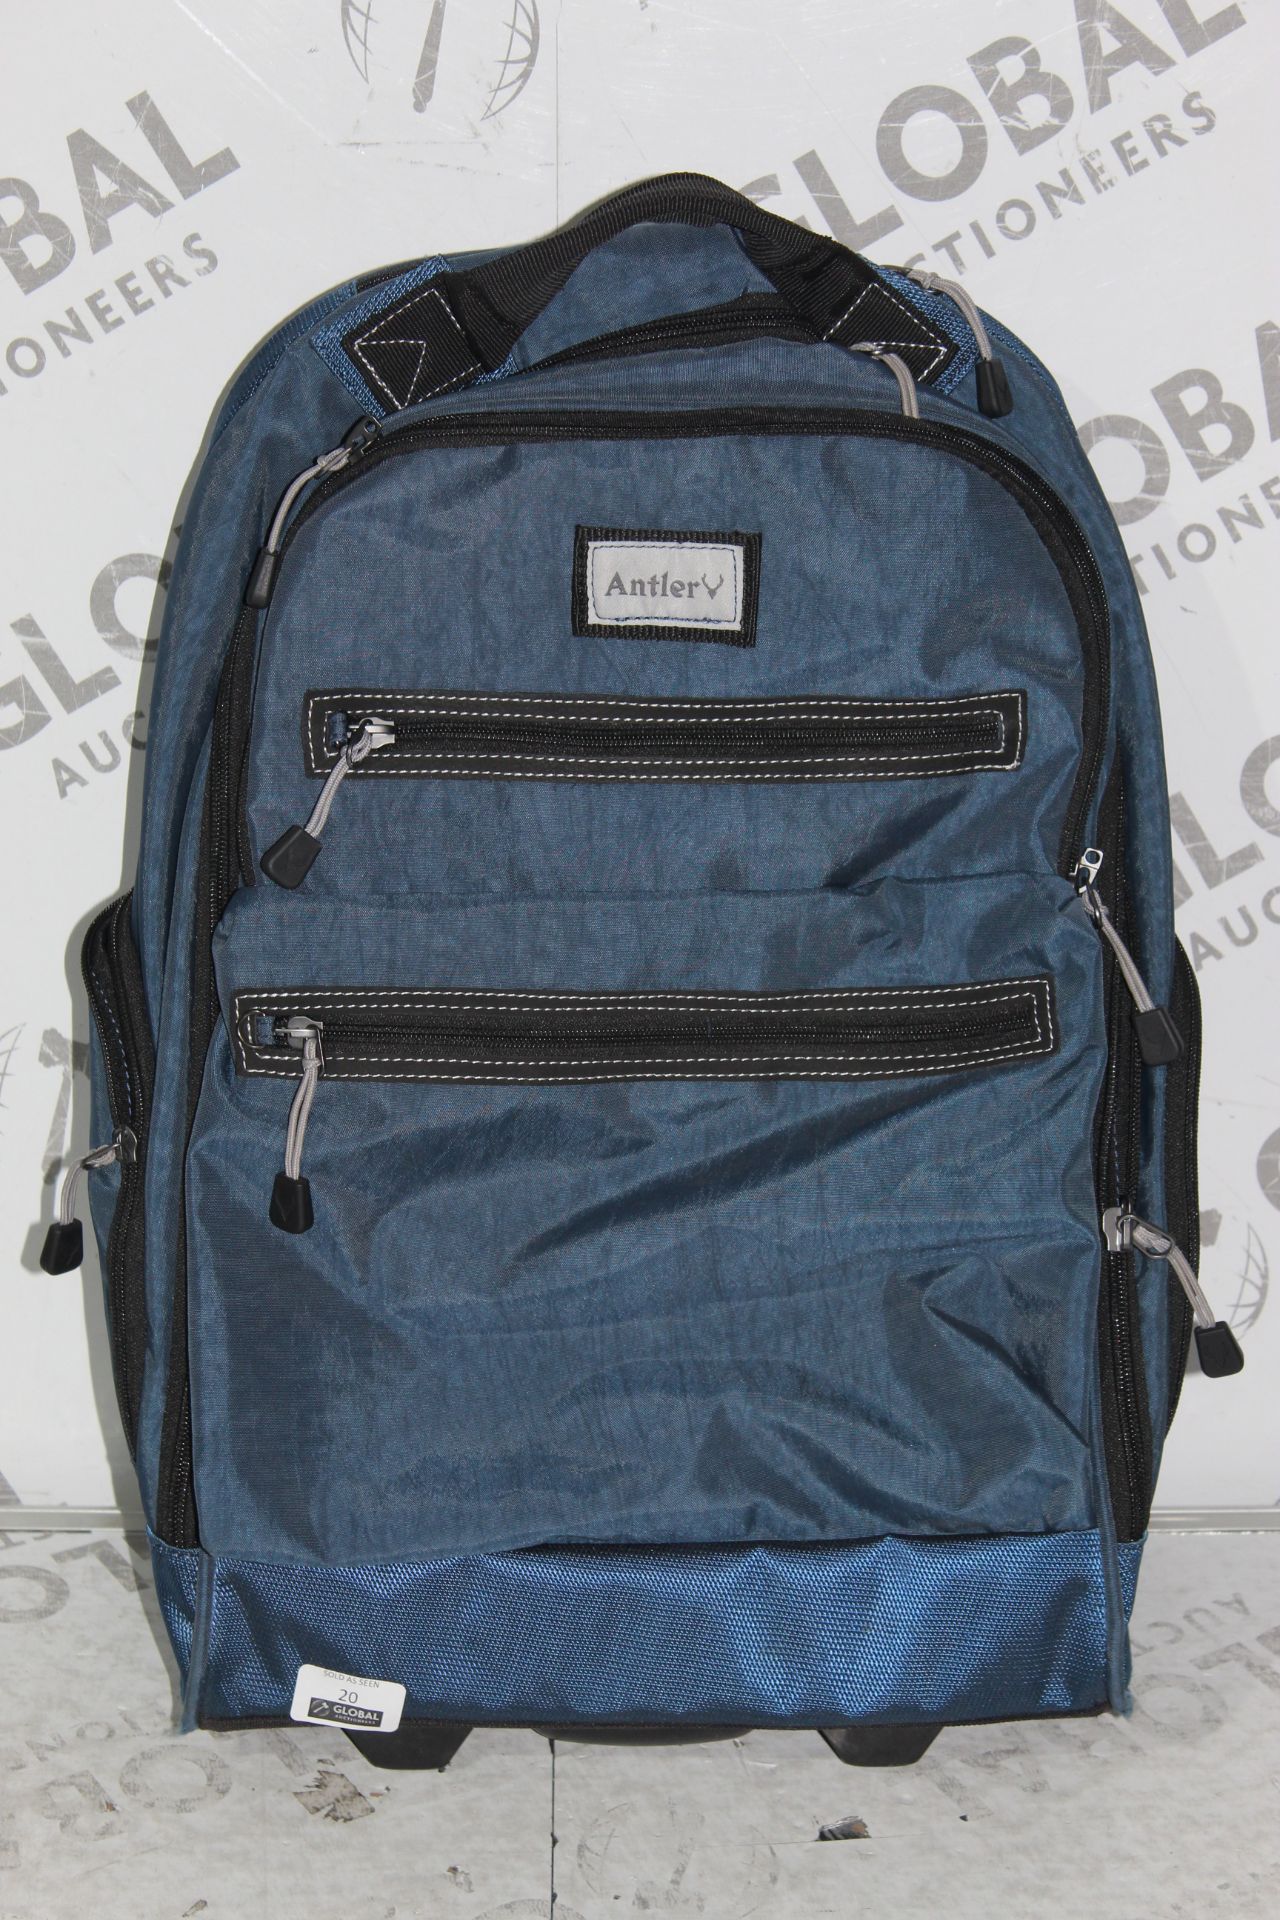 Assorted Antler Navvy Blue Wheeled Backpack and a Normal Hiking Backpack RRP £50 Each (